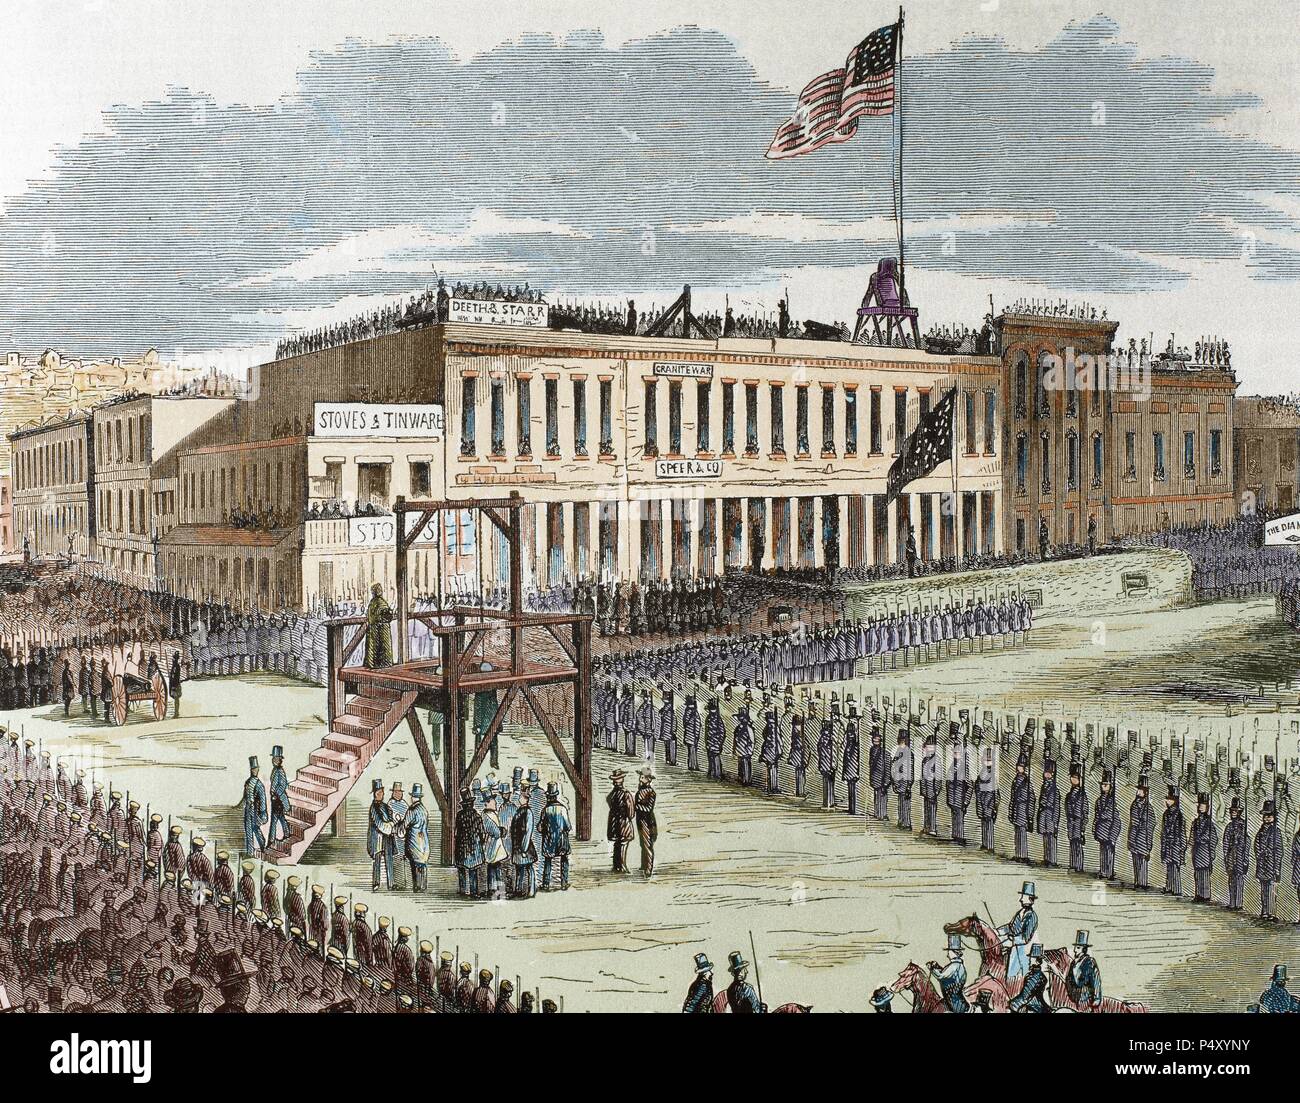 Public execution of murderers Joseph Hetherington and Philander Brace, 29 July 1856, convicted by a committee of San Francisco to die on the gallows. Engraving in 'Frank Leslie's,' 1856. Colored. Stock Photo